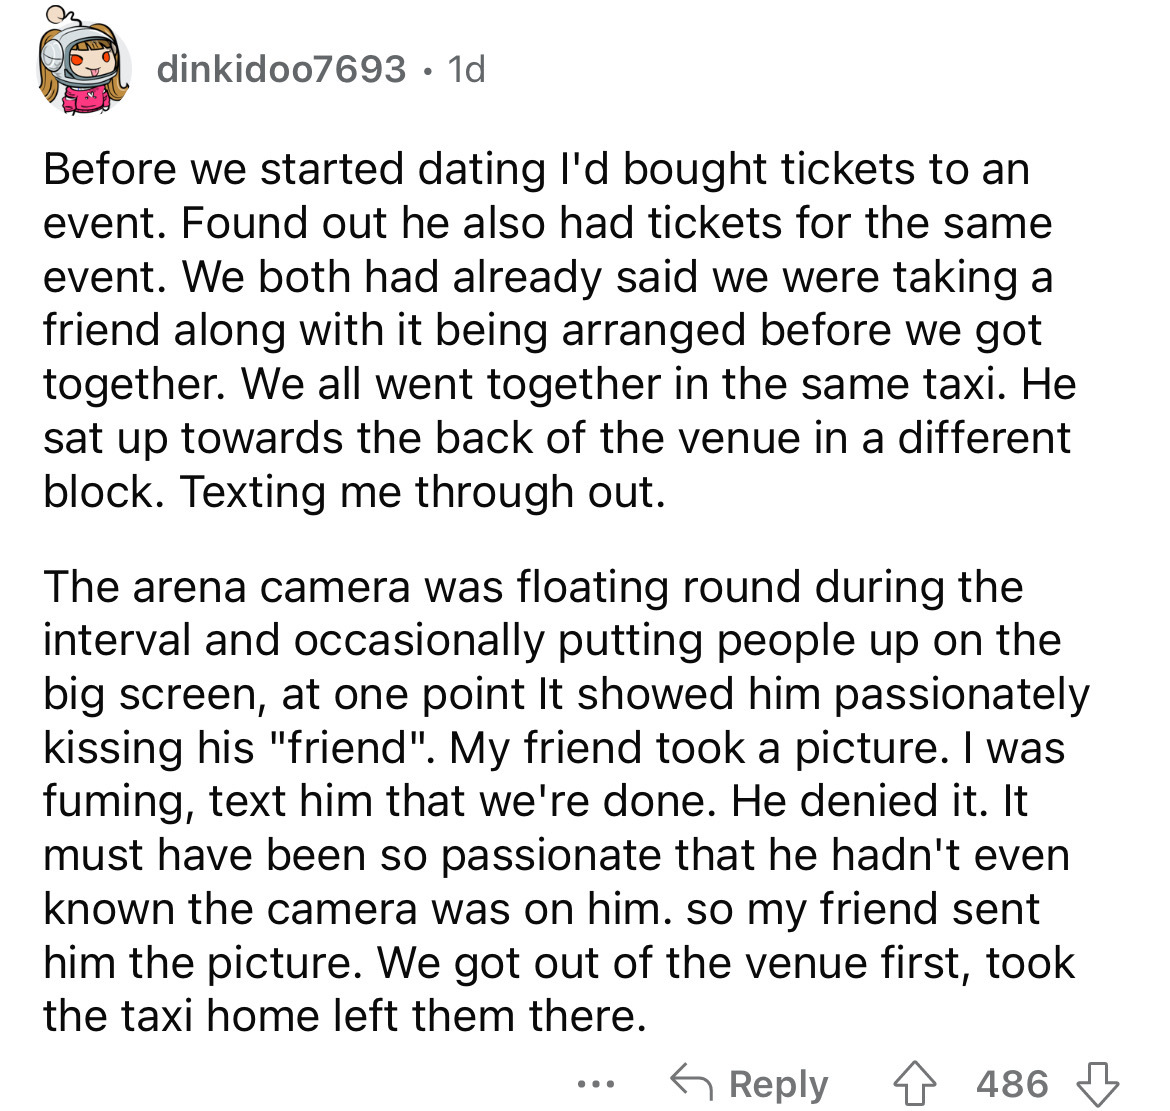 angle - dinkidoo7693 1d Before we started dating I'd bought tickets to an event. Found out he also had tickets for the same event. We both had already said we were taking a friend along with it being arranged before we got together. We all went together i